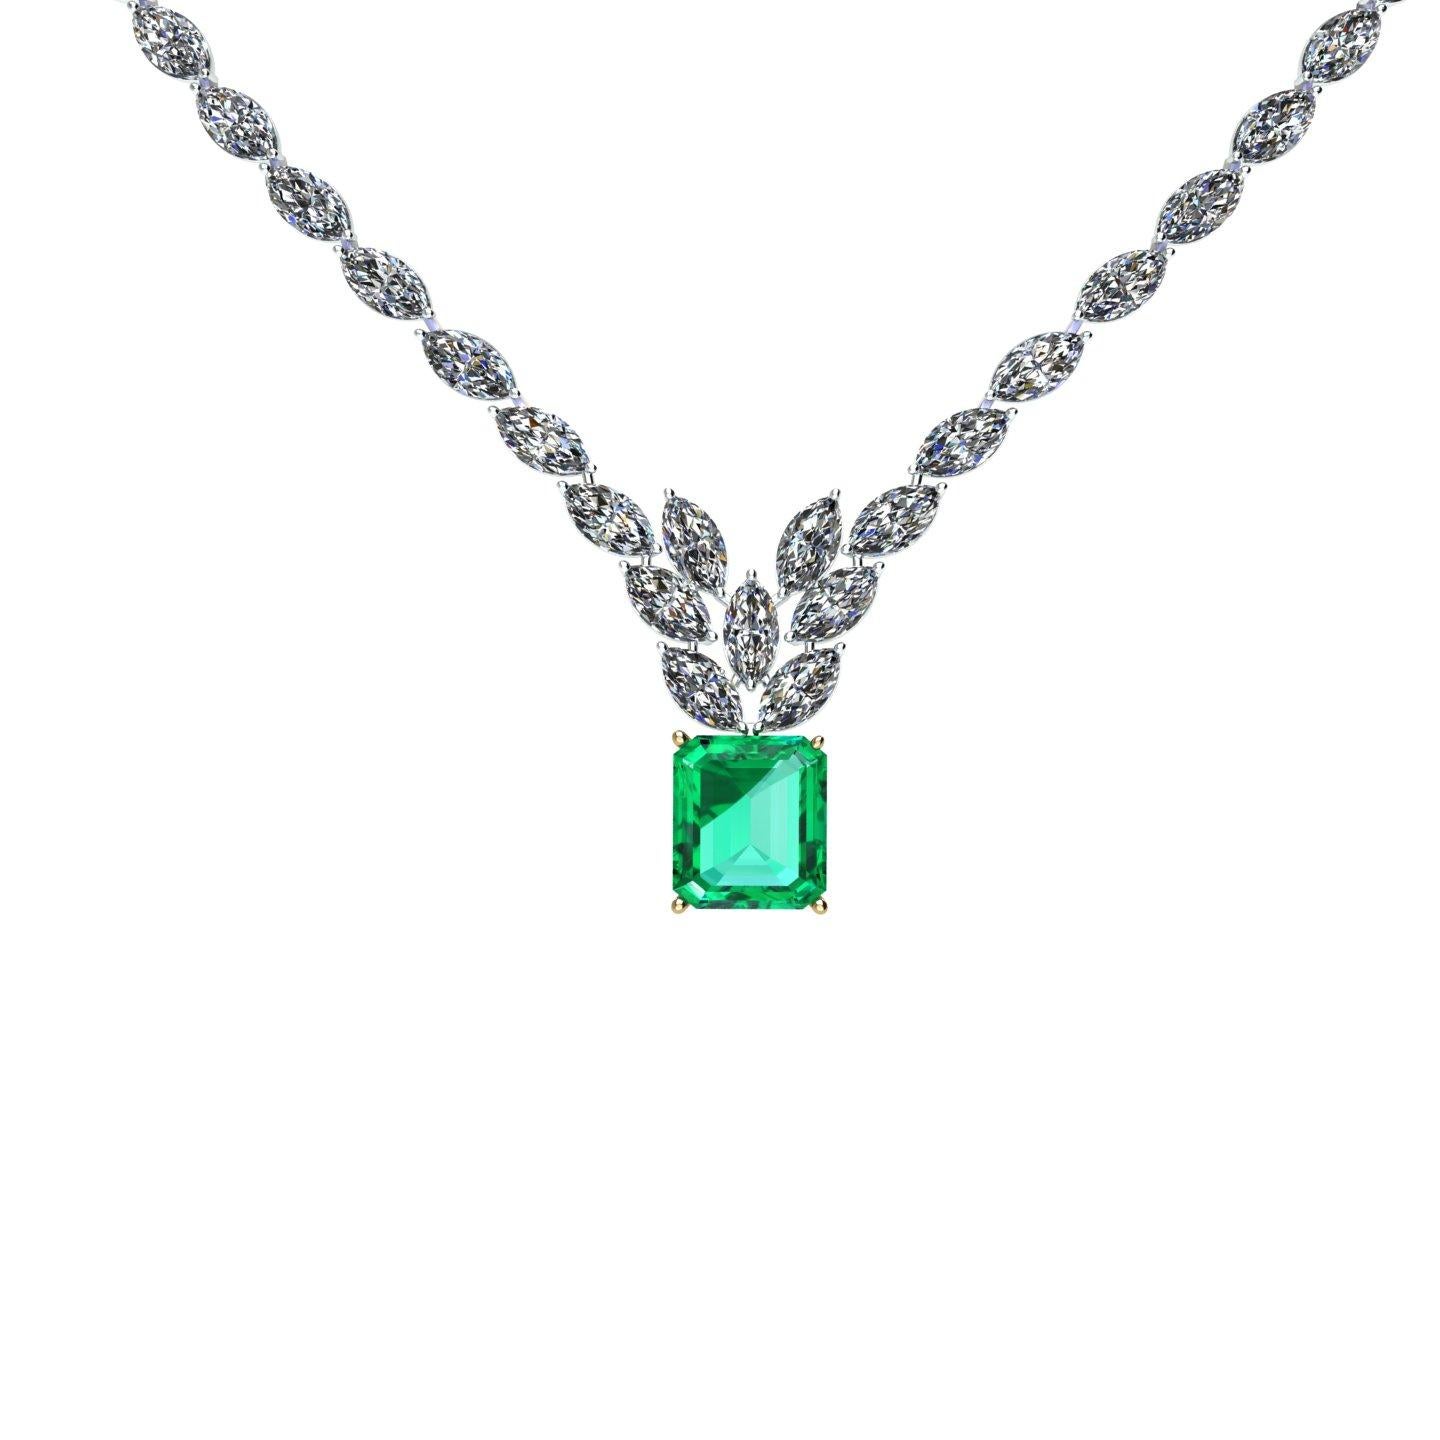 A unique necklaces showcasing approximately 23 carats of natural white Diamonds Marquise cut, G/F color, VS clarity, eye clean, with a center gemstone 6.31 carat GRS Certified Colombian Emerald, made in 18k yellow gold in the center setting and